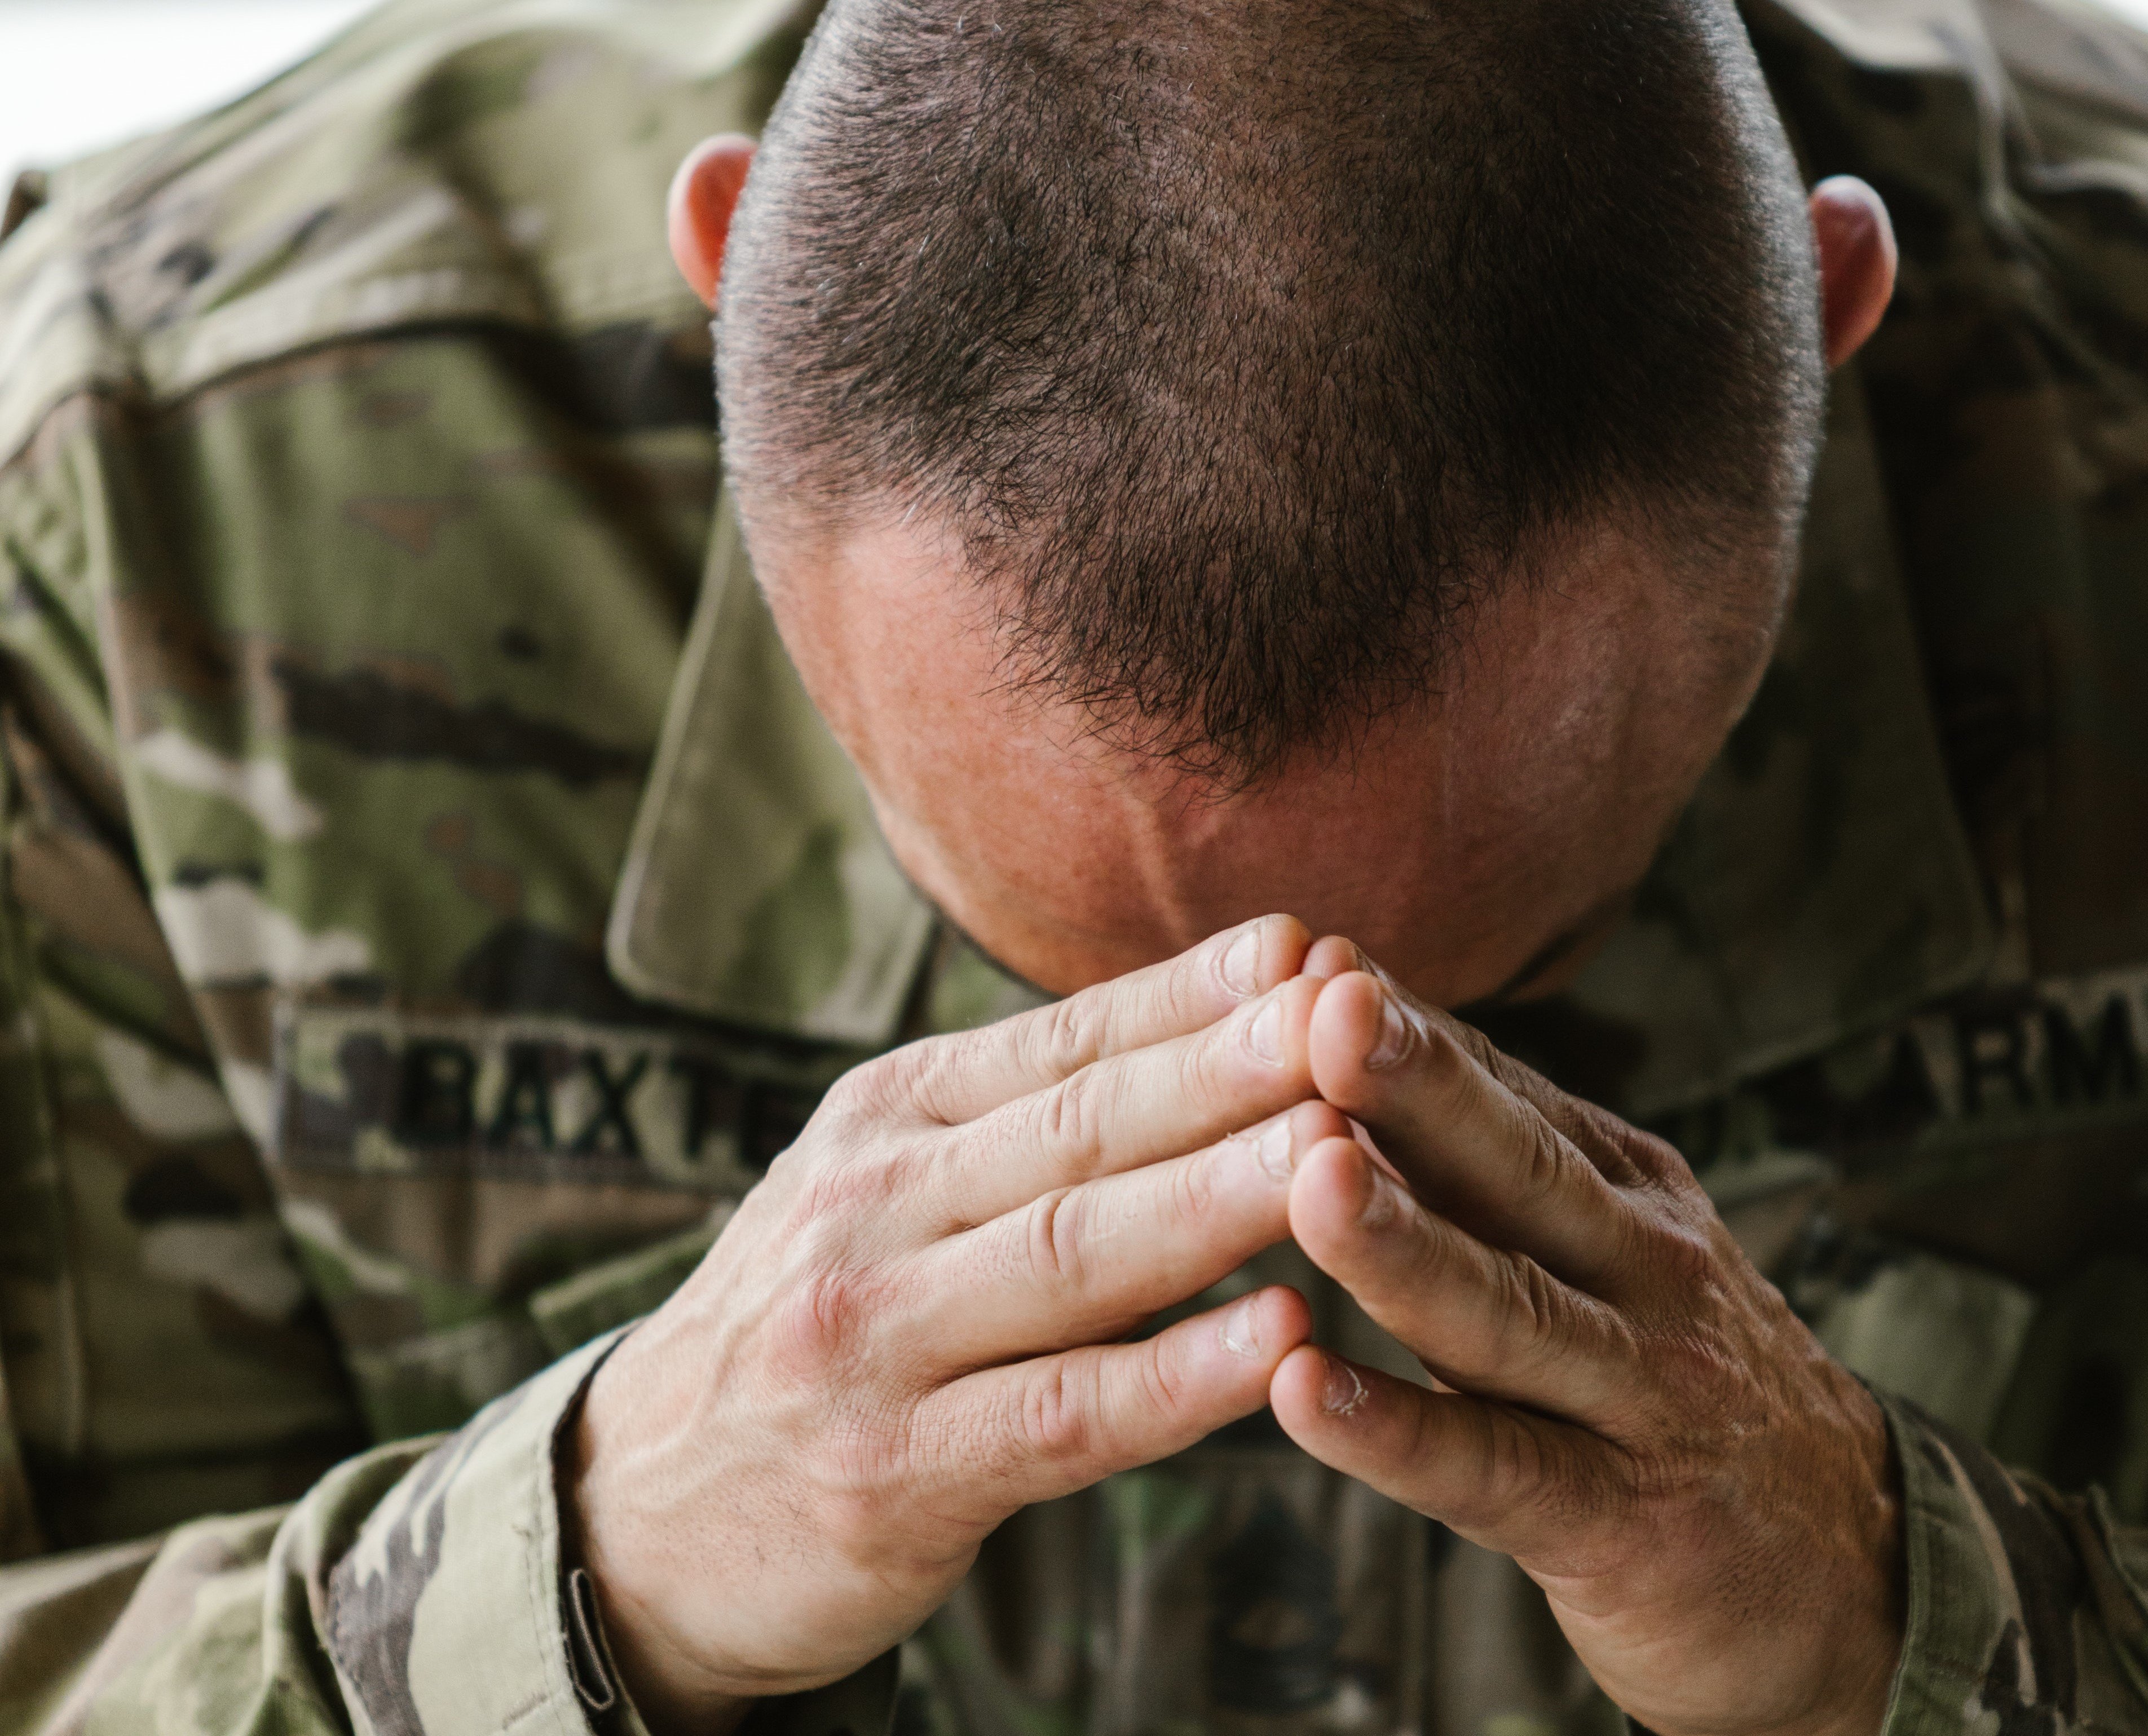 Joe lost his rank & was bombarded with additional punishment for wronging his fellow veteran. | Source: Pexels